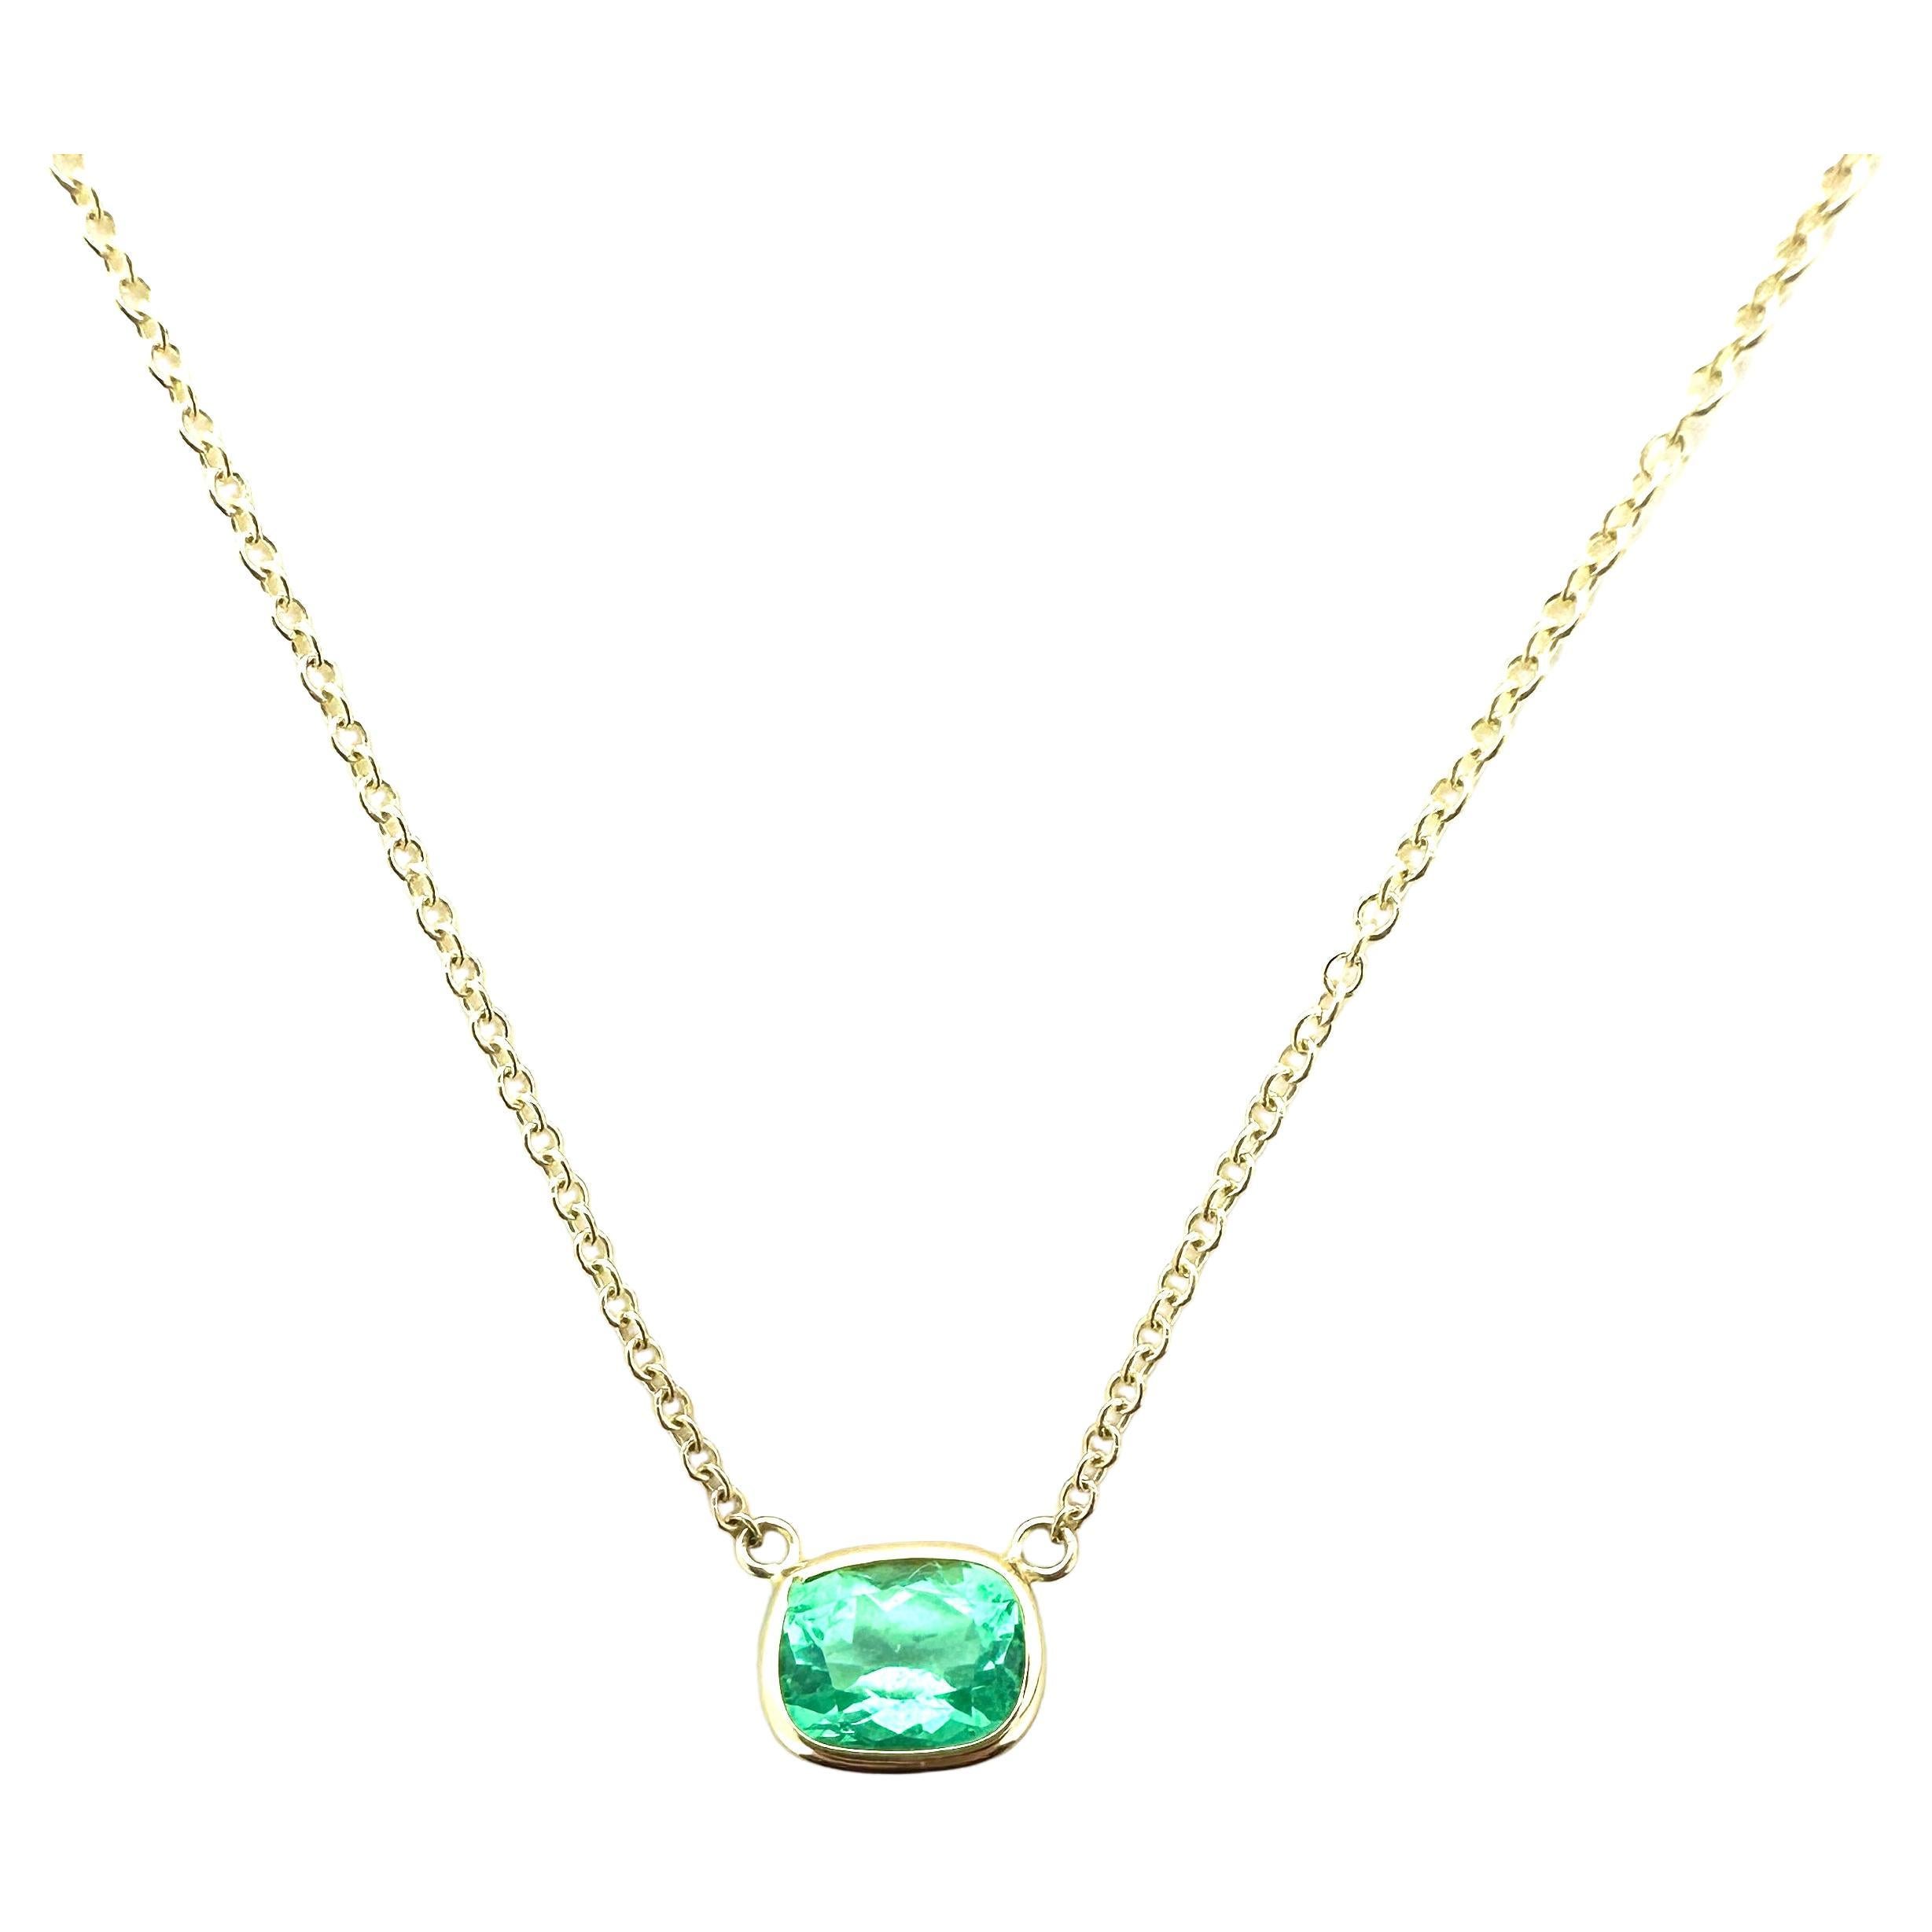 1.41 Carat Weight Green Emerald Long Cushion Cut Solitaire Necklace in 14k YG For Sale